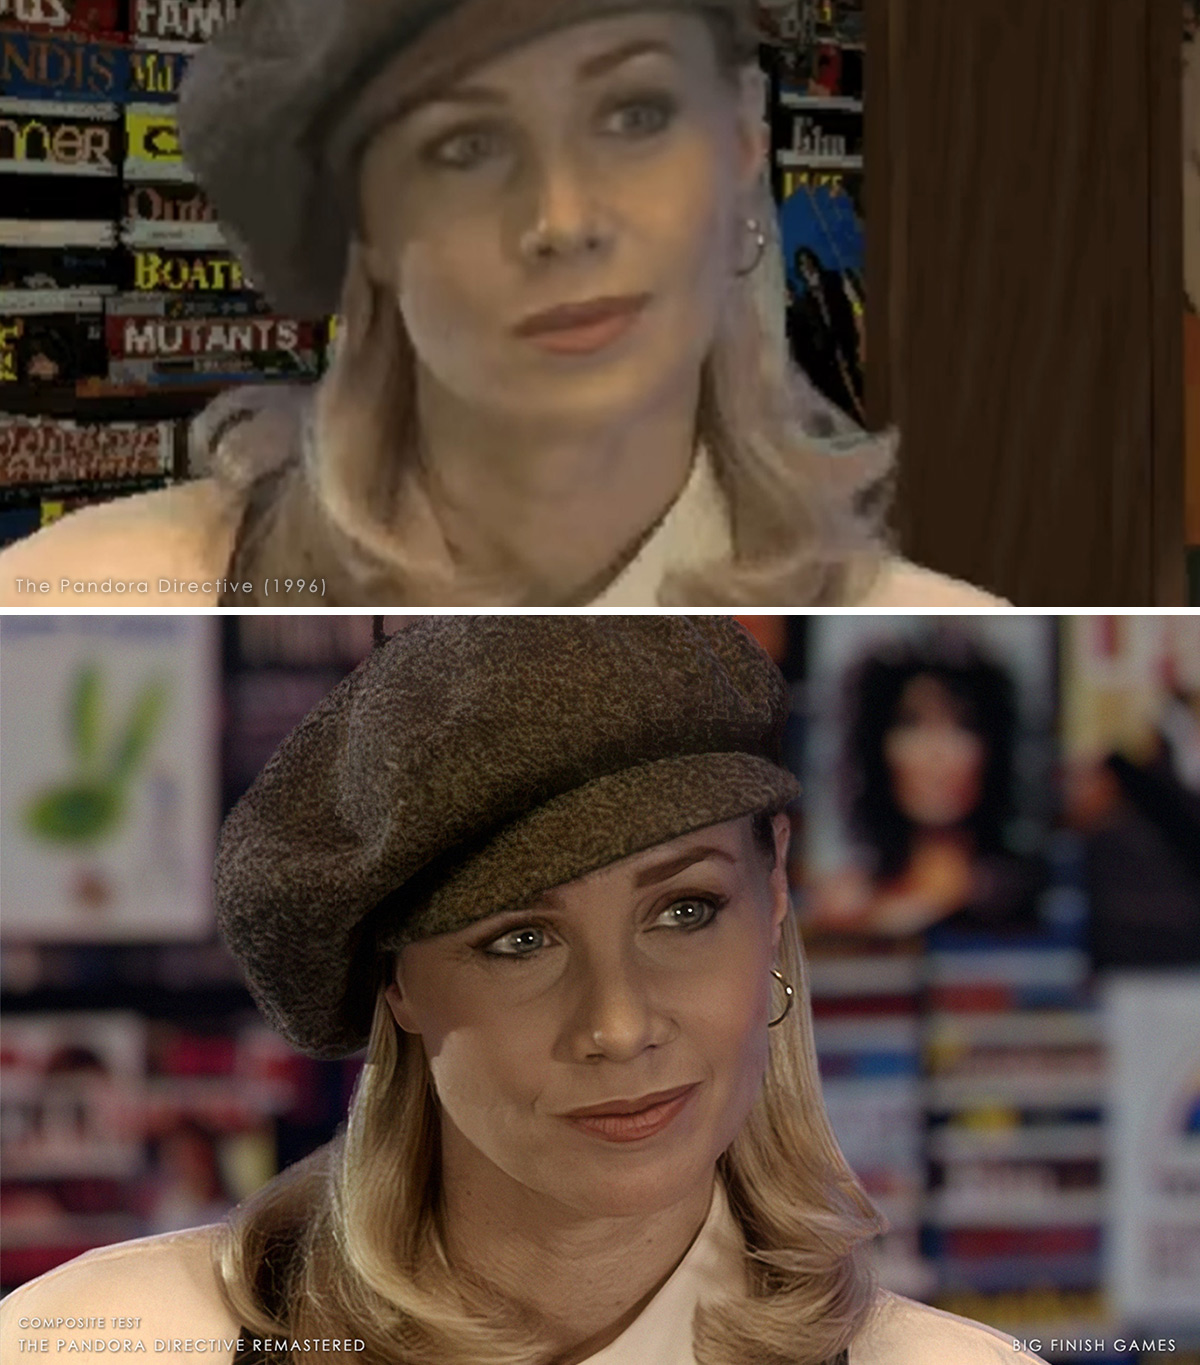 A top and bottom comparison of Chelsee Bando in the newsstand, between the original 1996 video and the modern remaster.